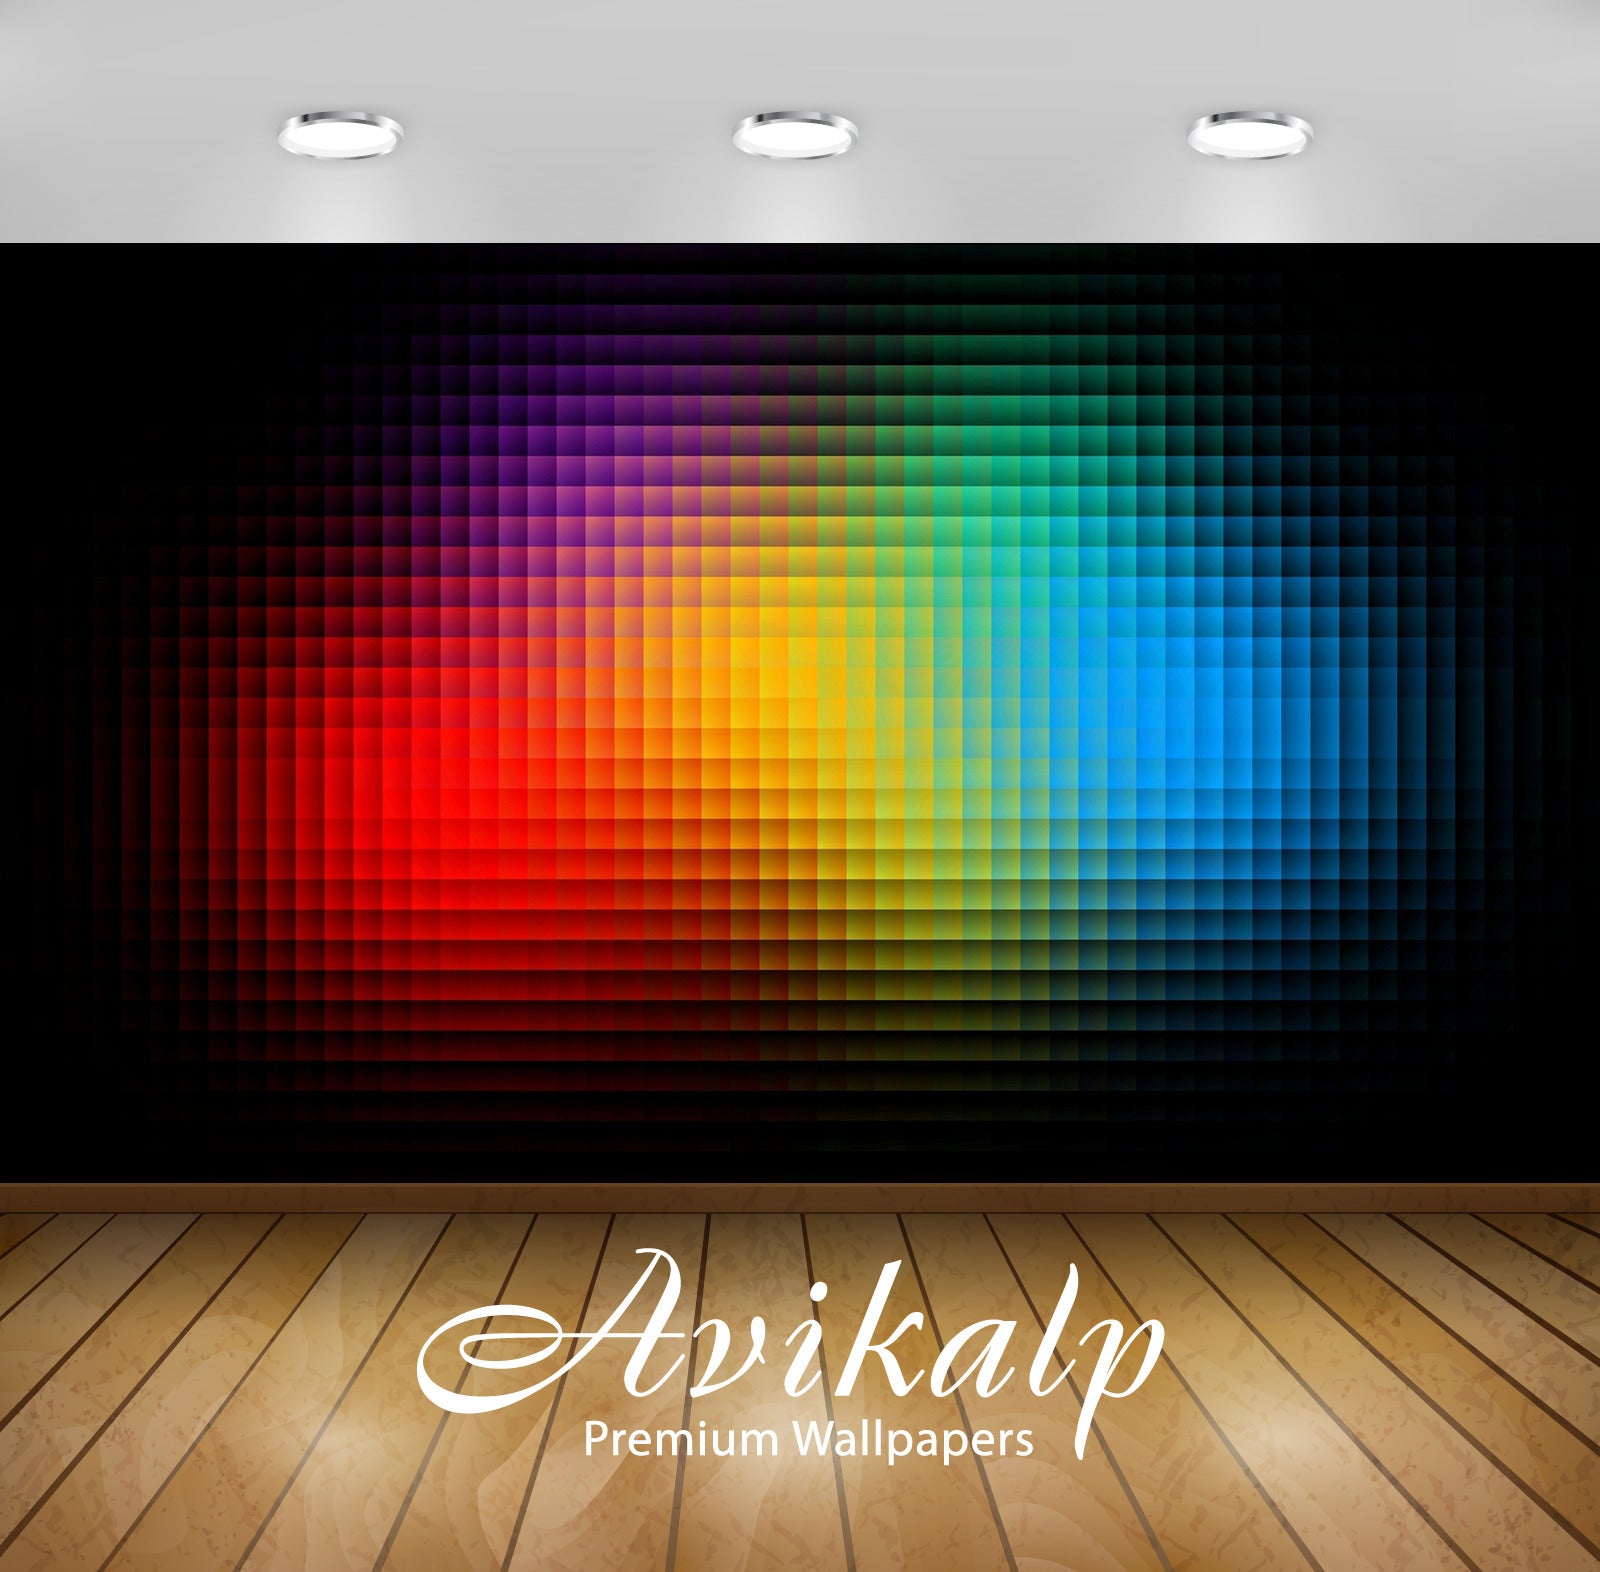 Avikalp Exclusive Awi4198 Colorful Squares Full HD Wallpapers for Living room, Hall, Kids Room, Kitc